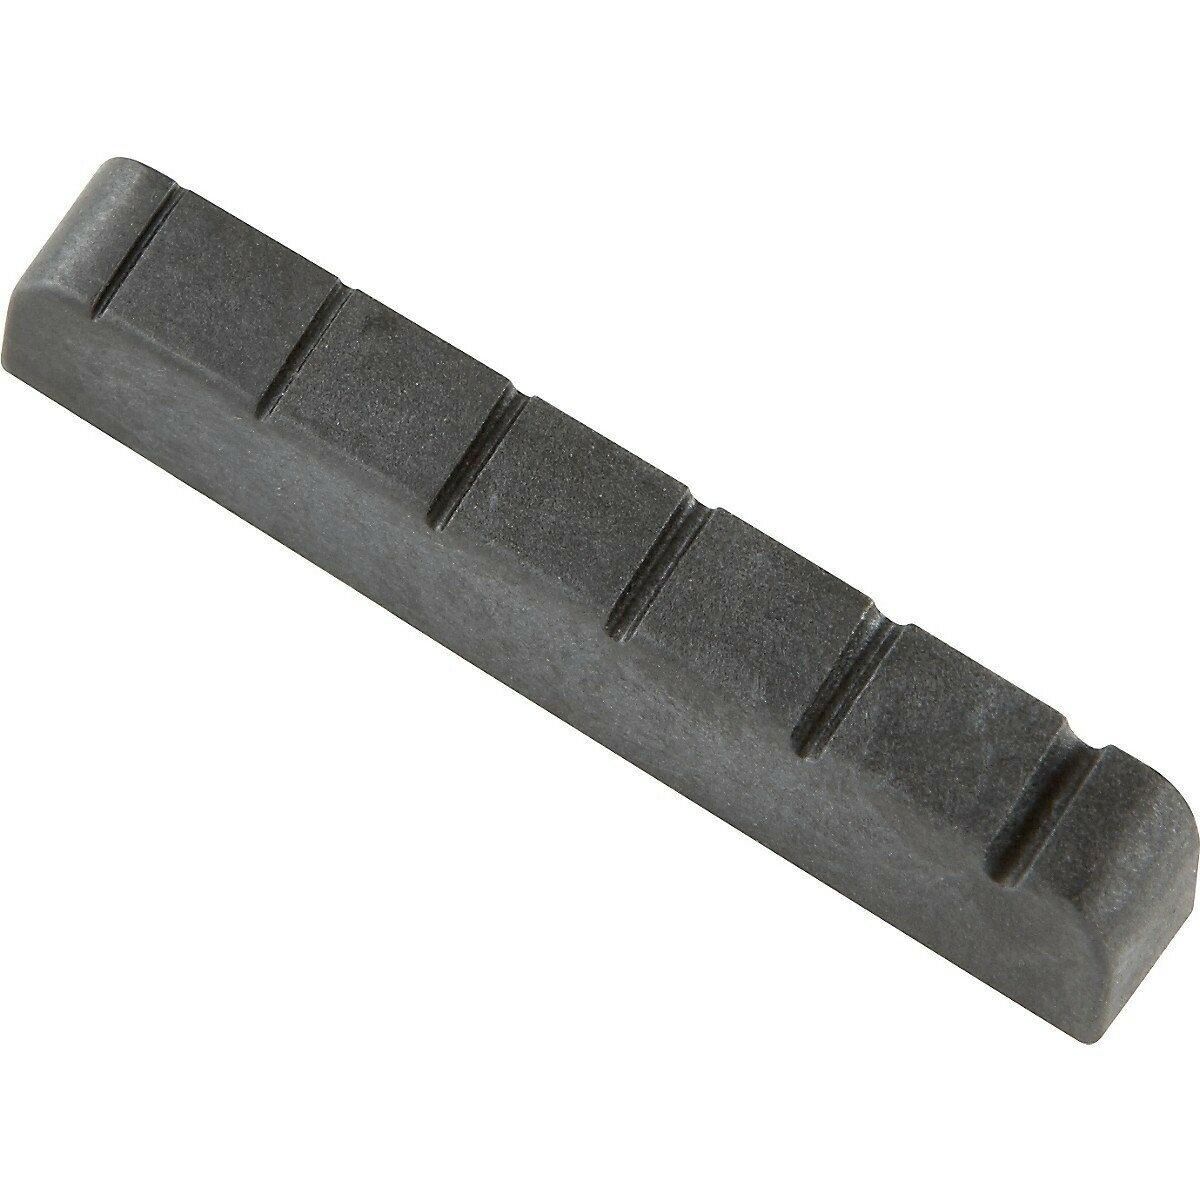 New Graphite Nut Slotted For Gibson Les Paul Guitars - Black